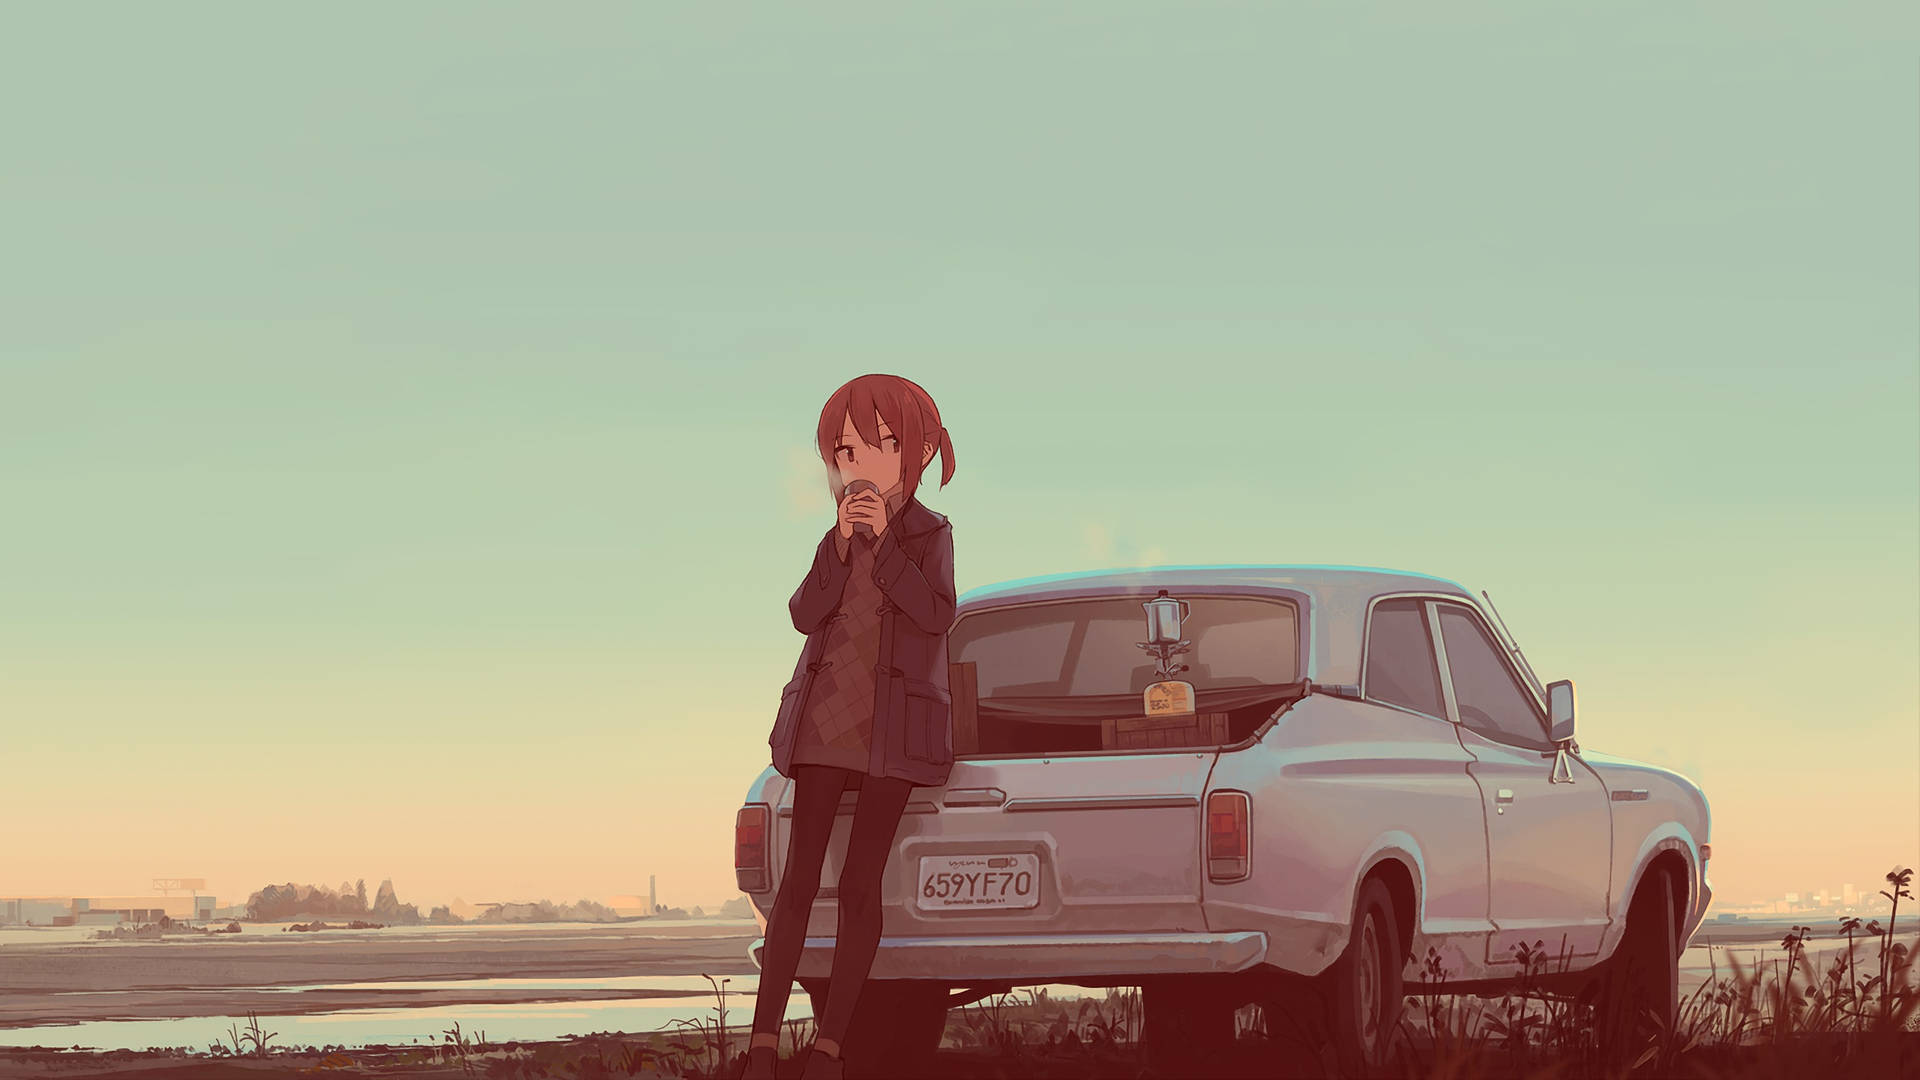 A Girl Standing Next To A Car